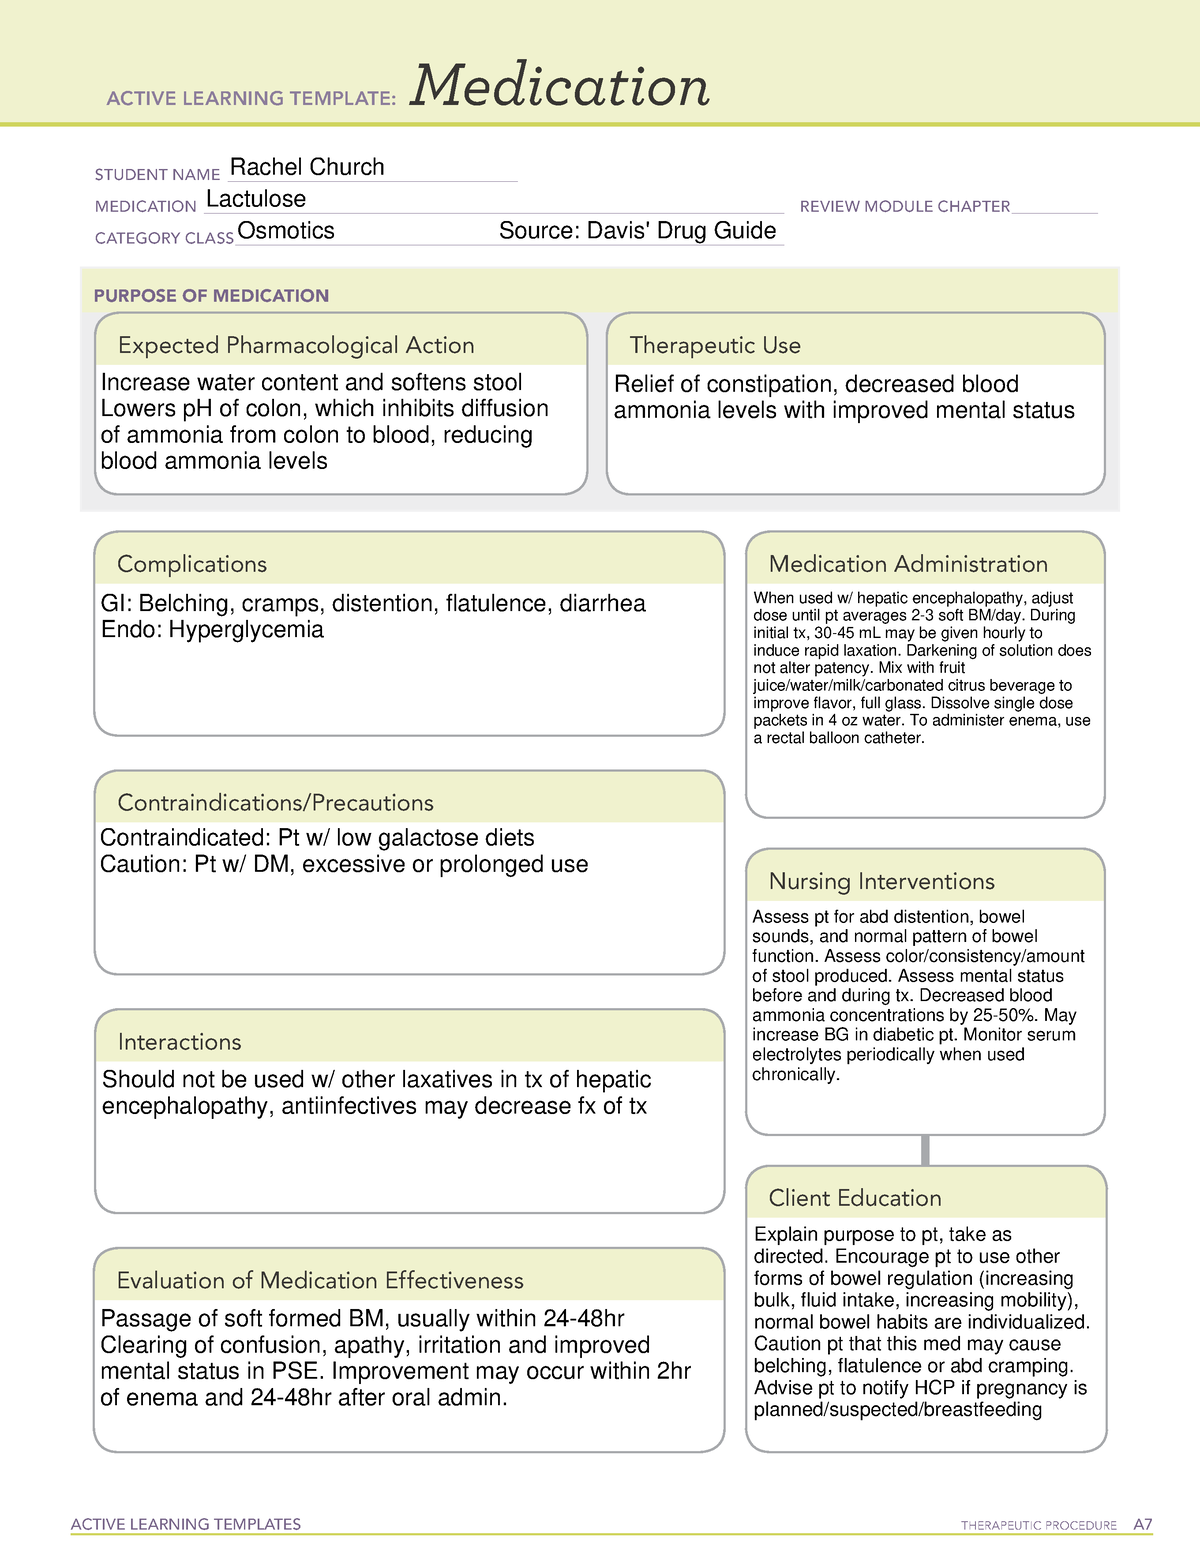 lactulose-week-3-active-learning-templates-therapeutic-procedure-a